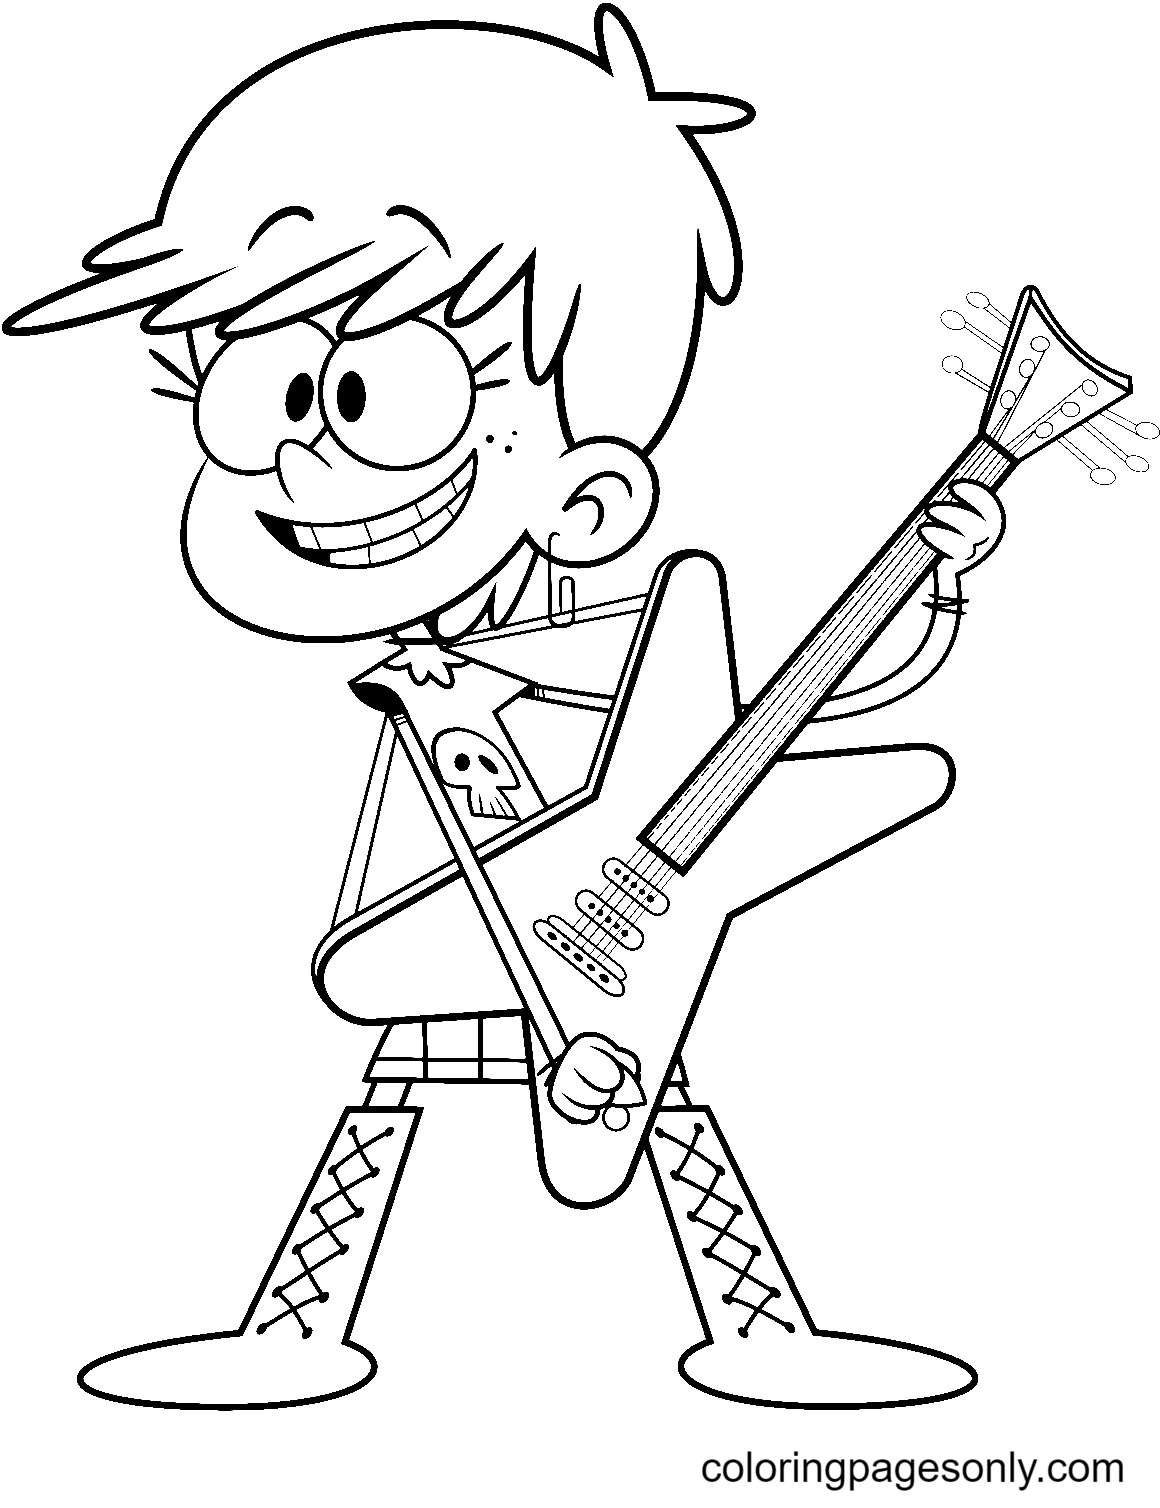 Characters From The Loud House Coloring Pages Coloring Cool Hot Sex